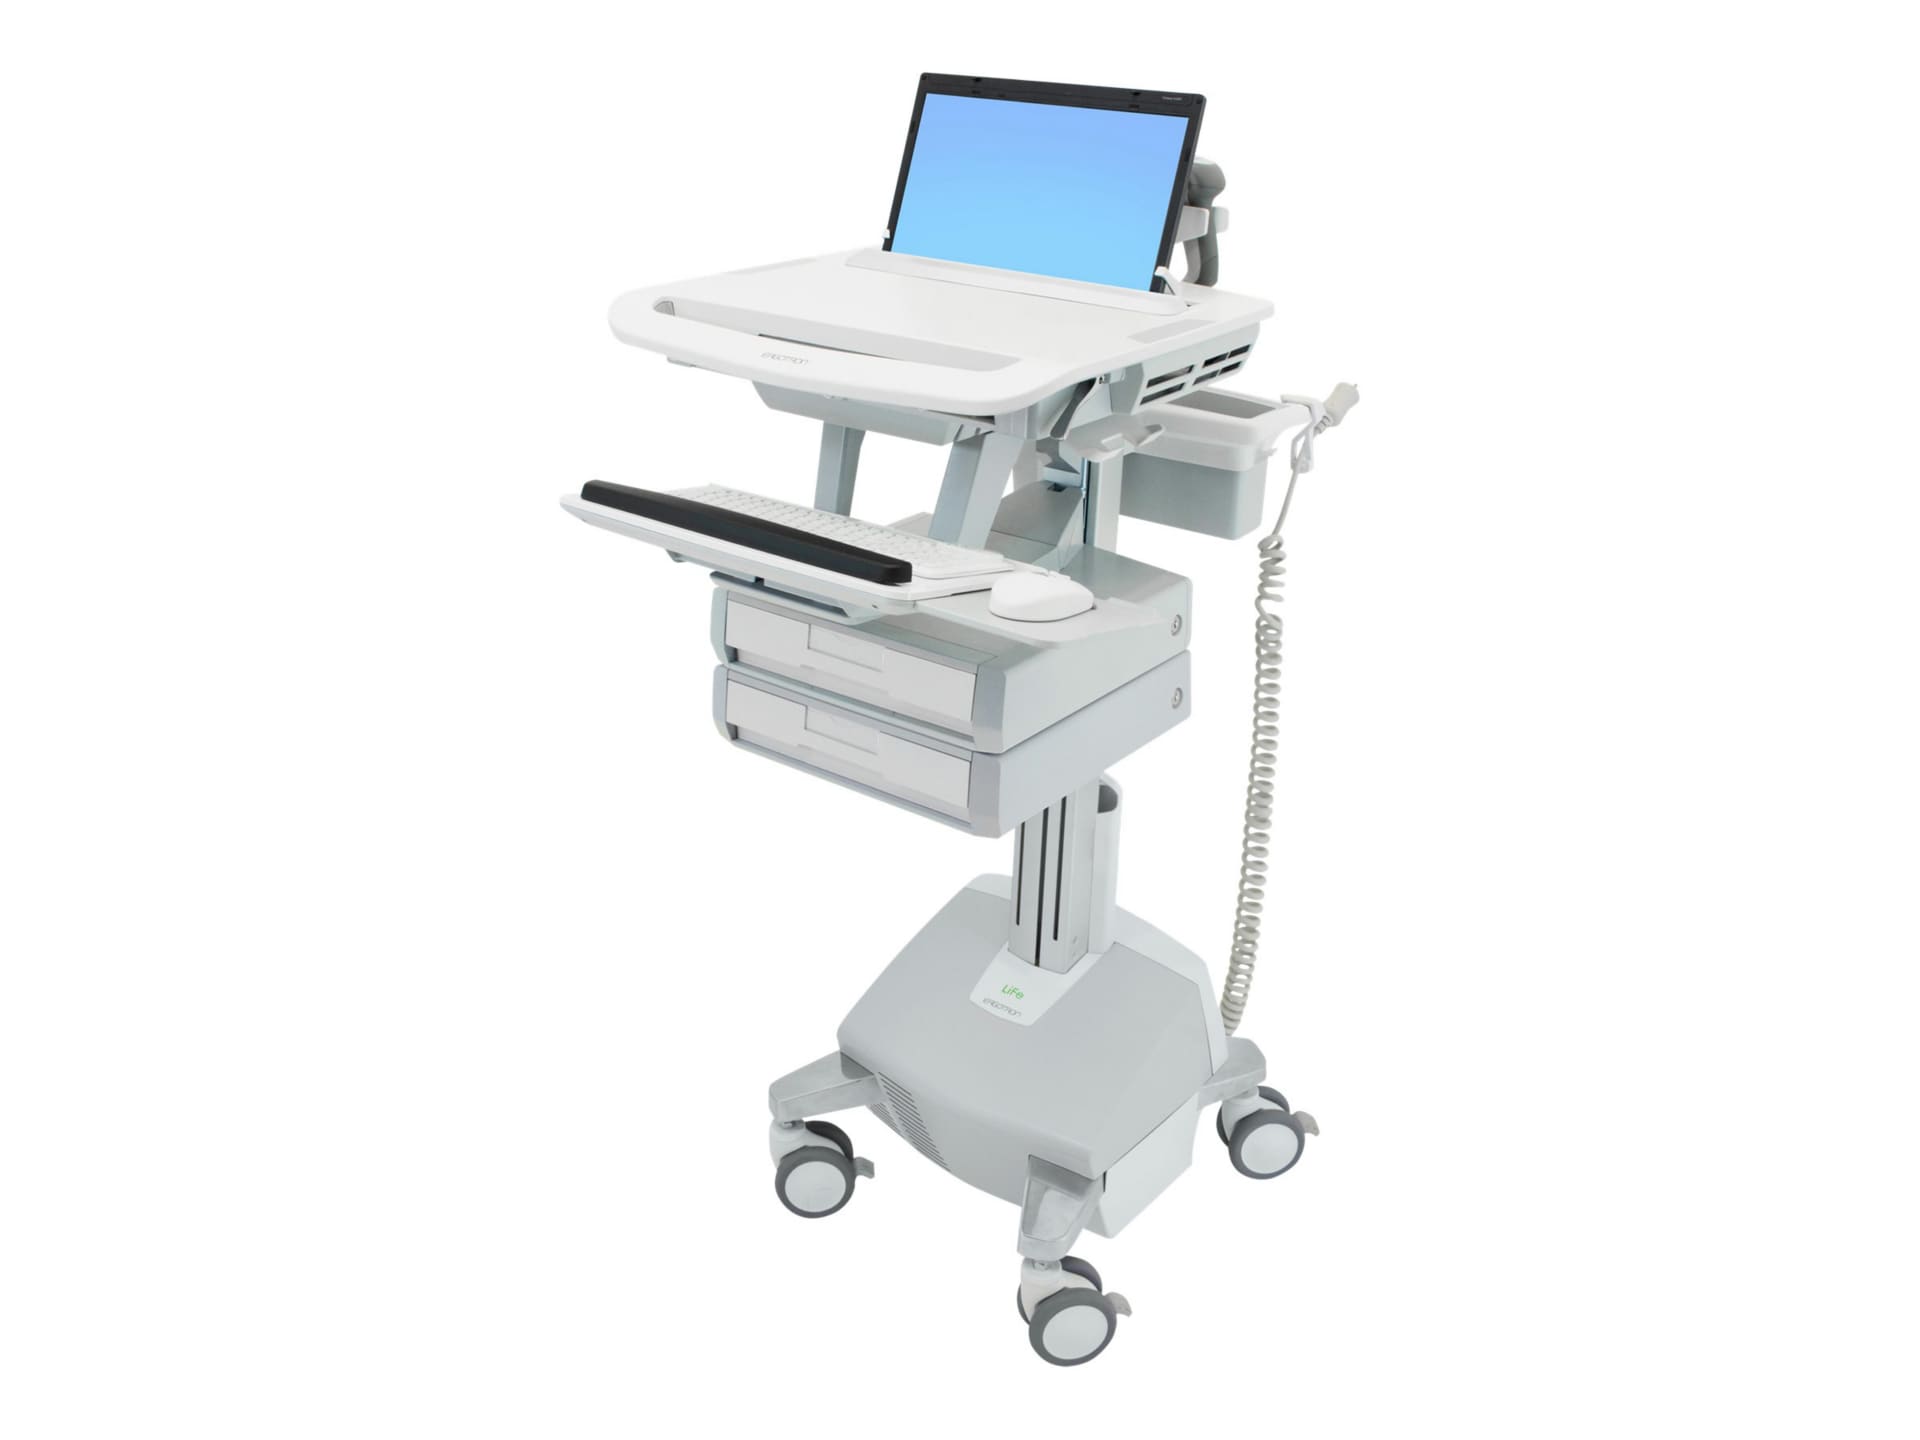 Ergotron StyleView cart - open architecture - for notebook / keyboard / mouse - gray, white, polished aluminum - TAA